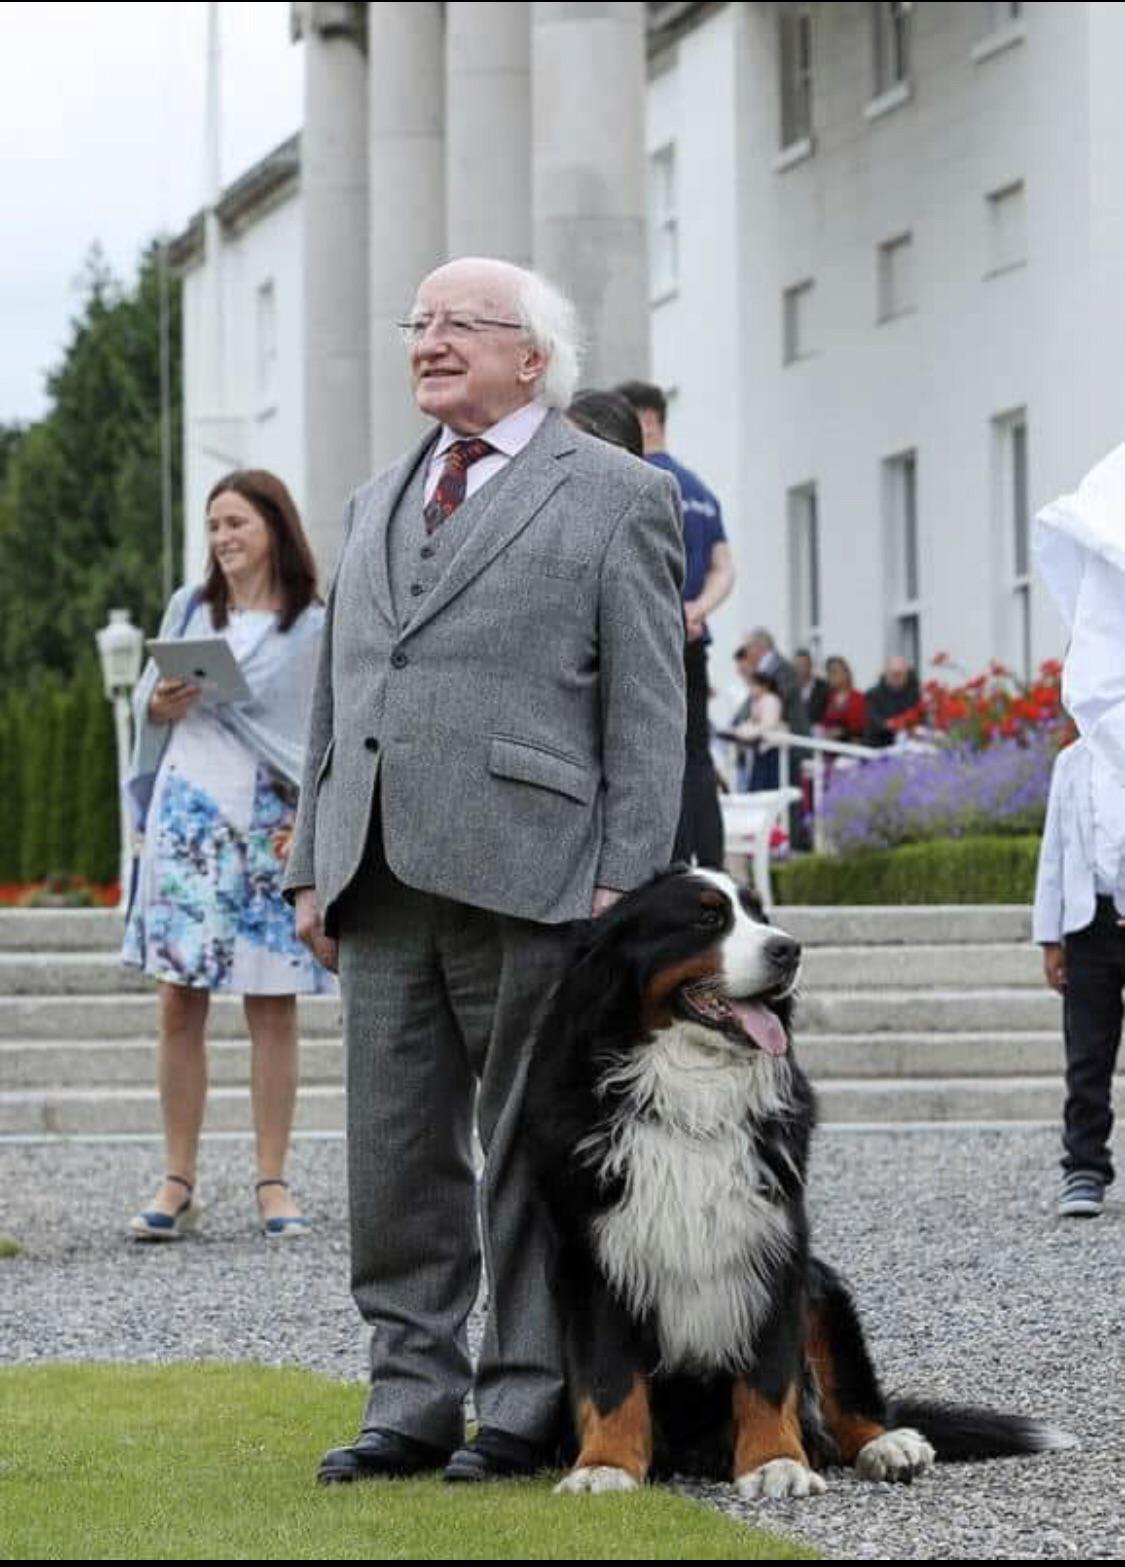 The President of Ireland and the First Pupper make an appearance...